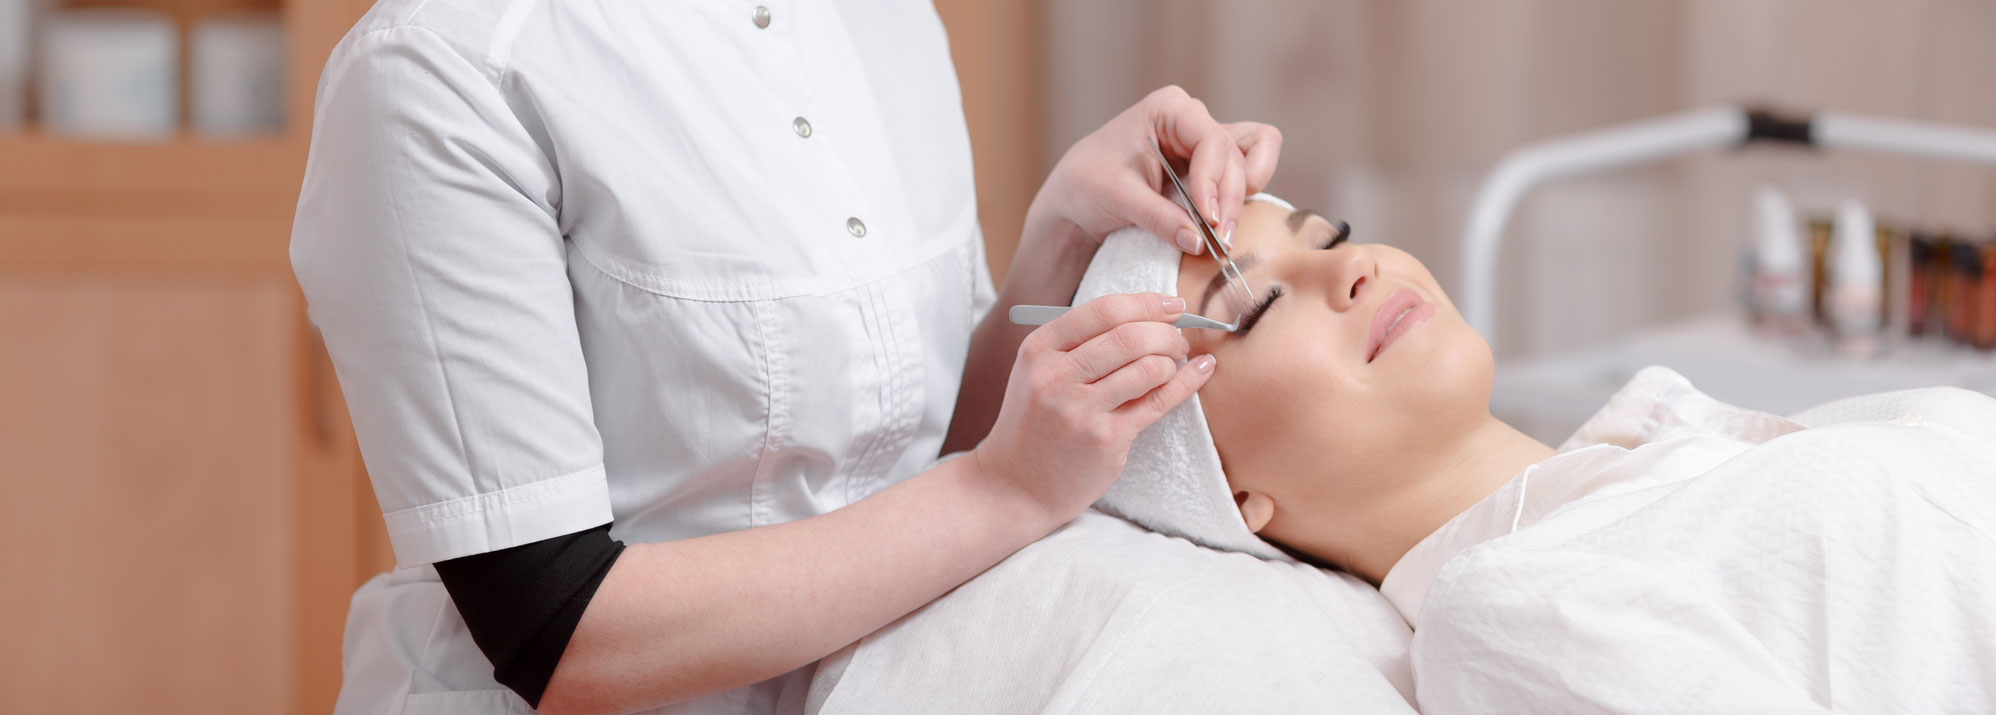 NVQ VTCT level 2 diploma beauty courses in West London